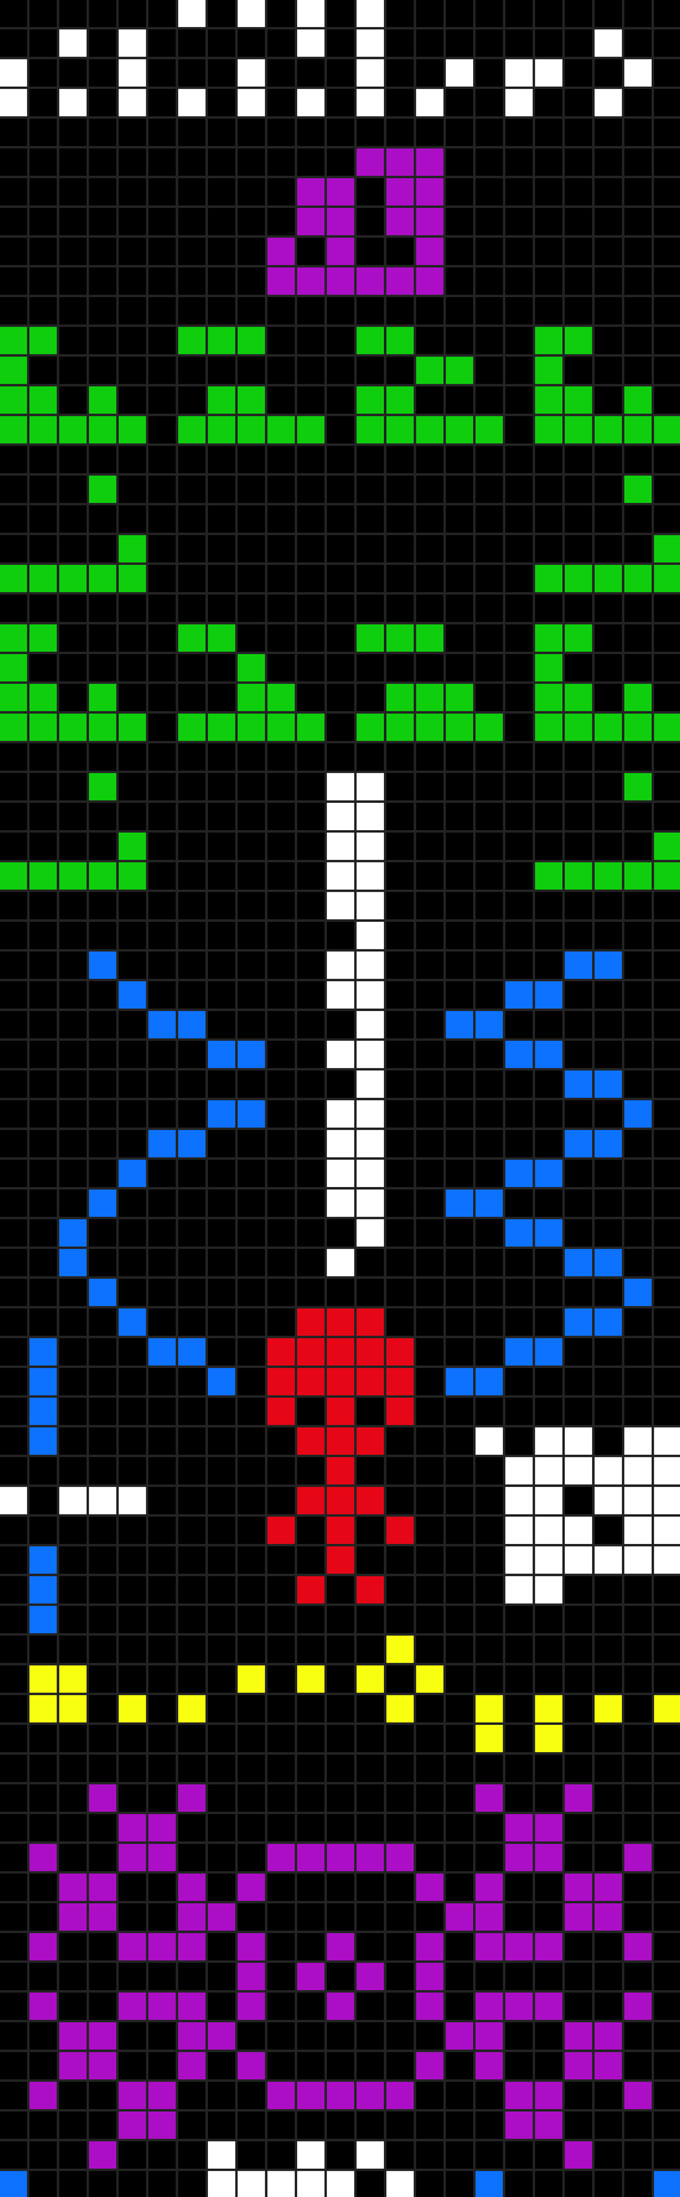 A vertical image showing the Arecibo Message.  The image consists of several different colored small squares grouped on a black background.